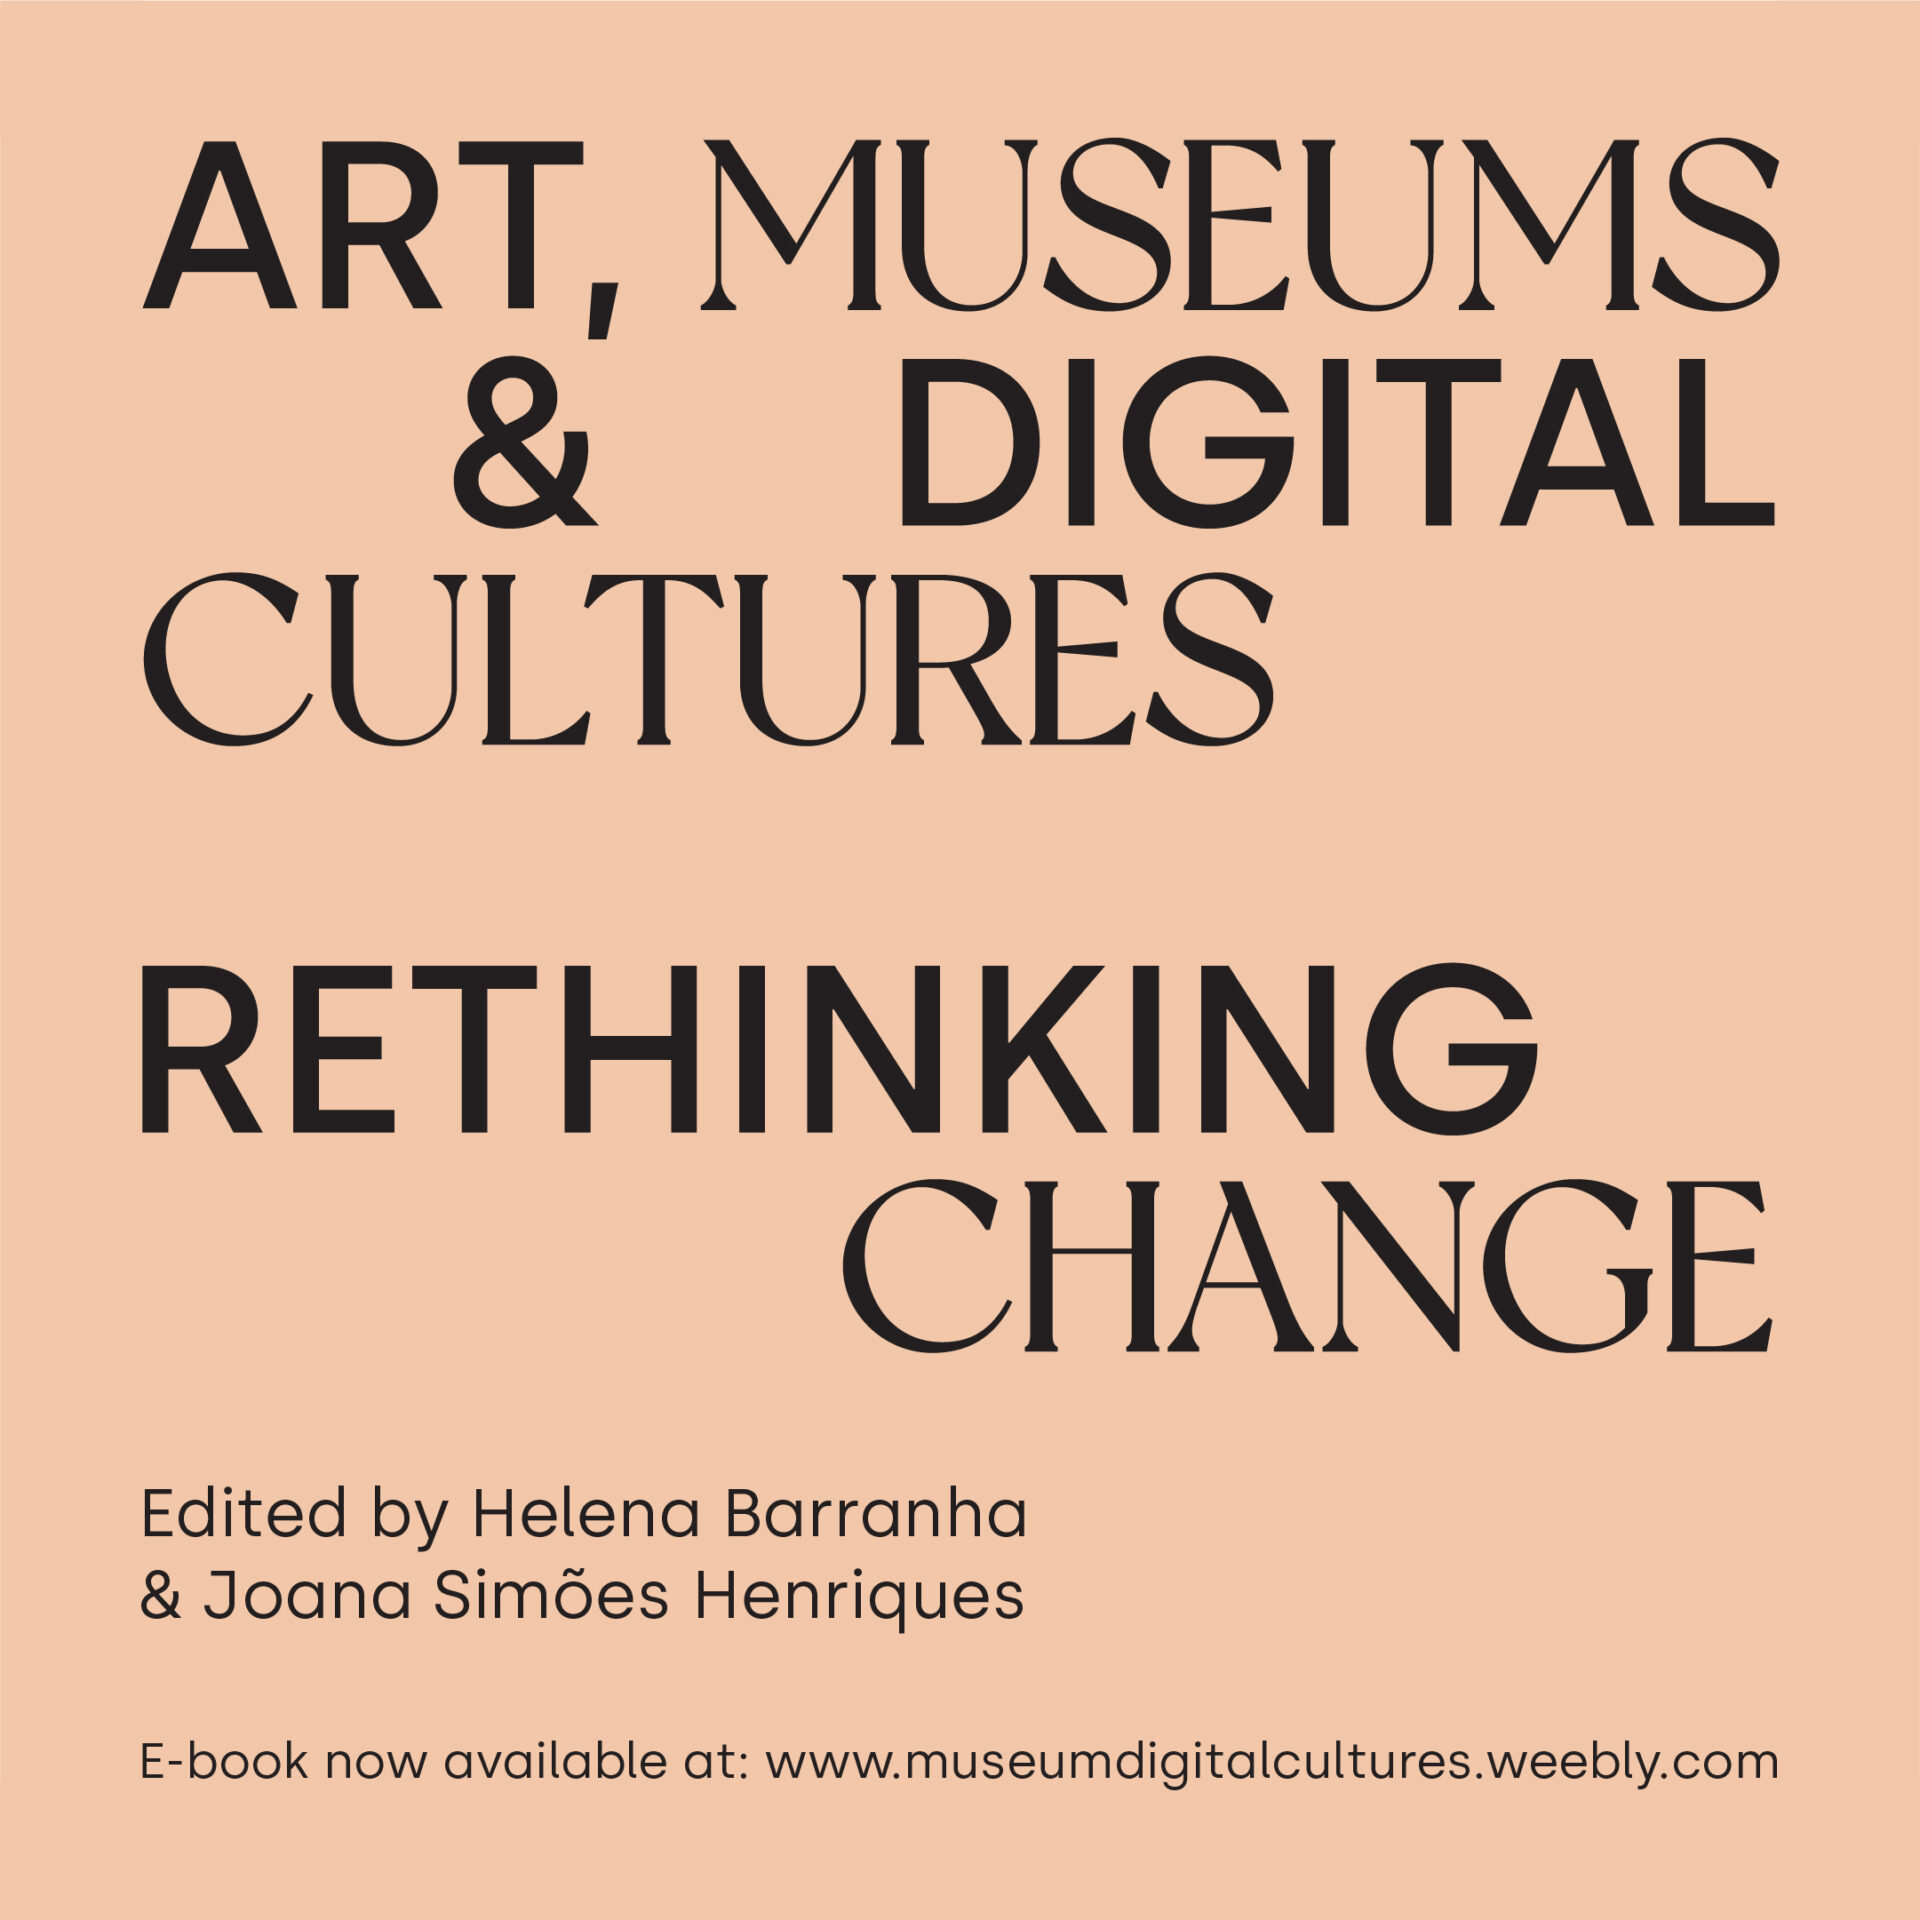 Institute of Art History, School of Social Sciences and Humanities, Universidade NOVA de Lisboa, in association with the Museum of Art, Architecture and Technology, Lisbon.